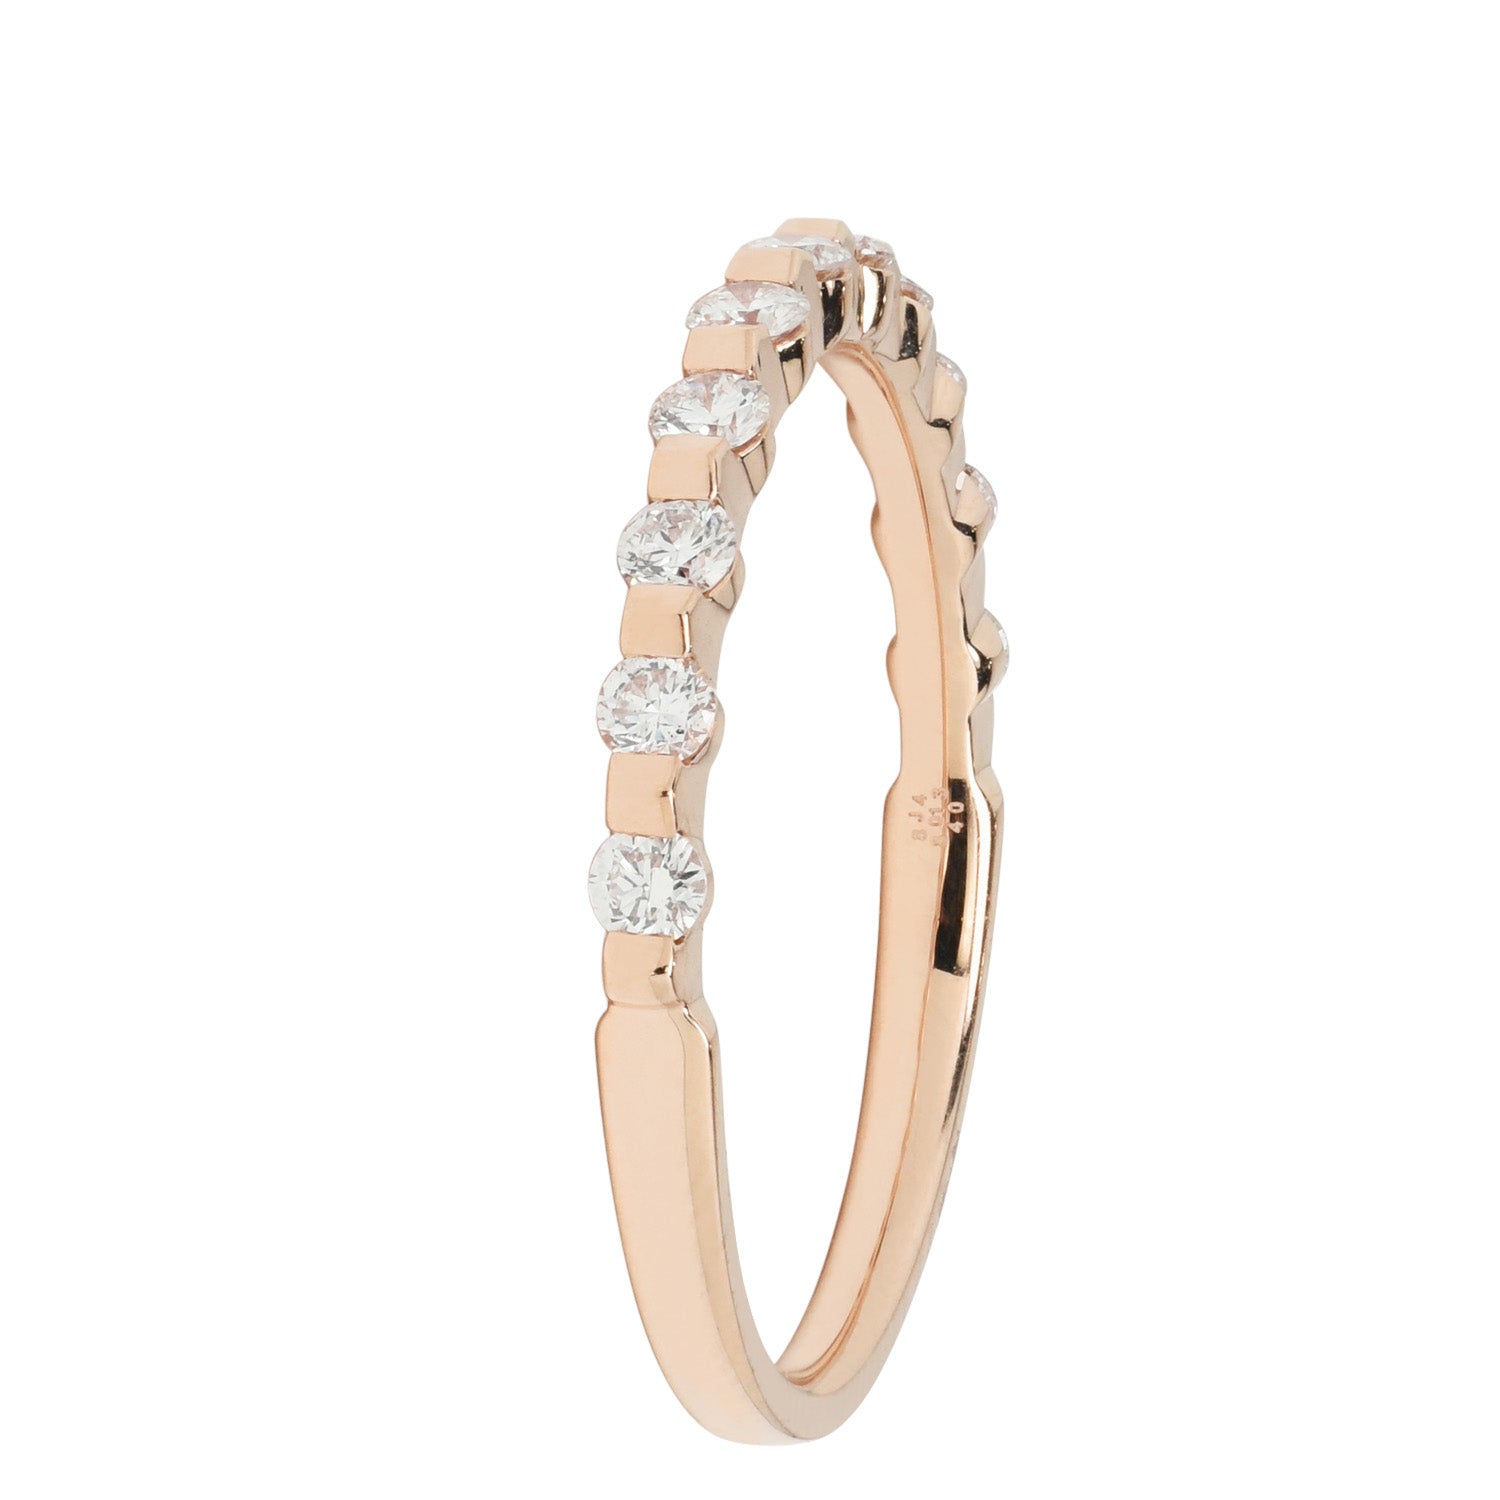 Memoire Precious Prong Diamond Wedding Band in 18kt Rose Gold (1/3ct tw)